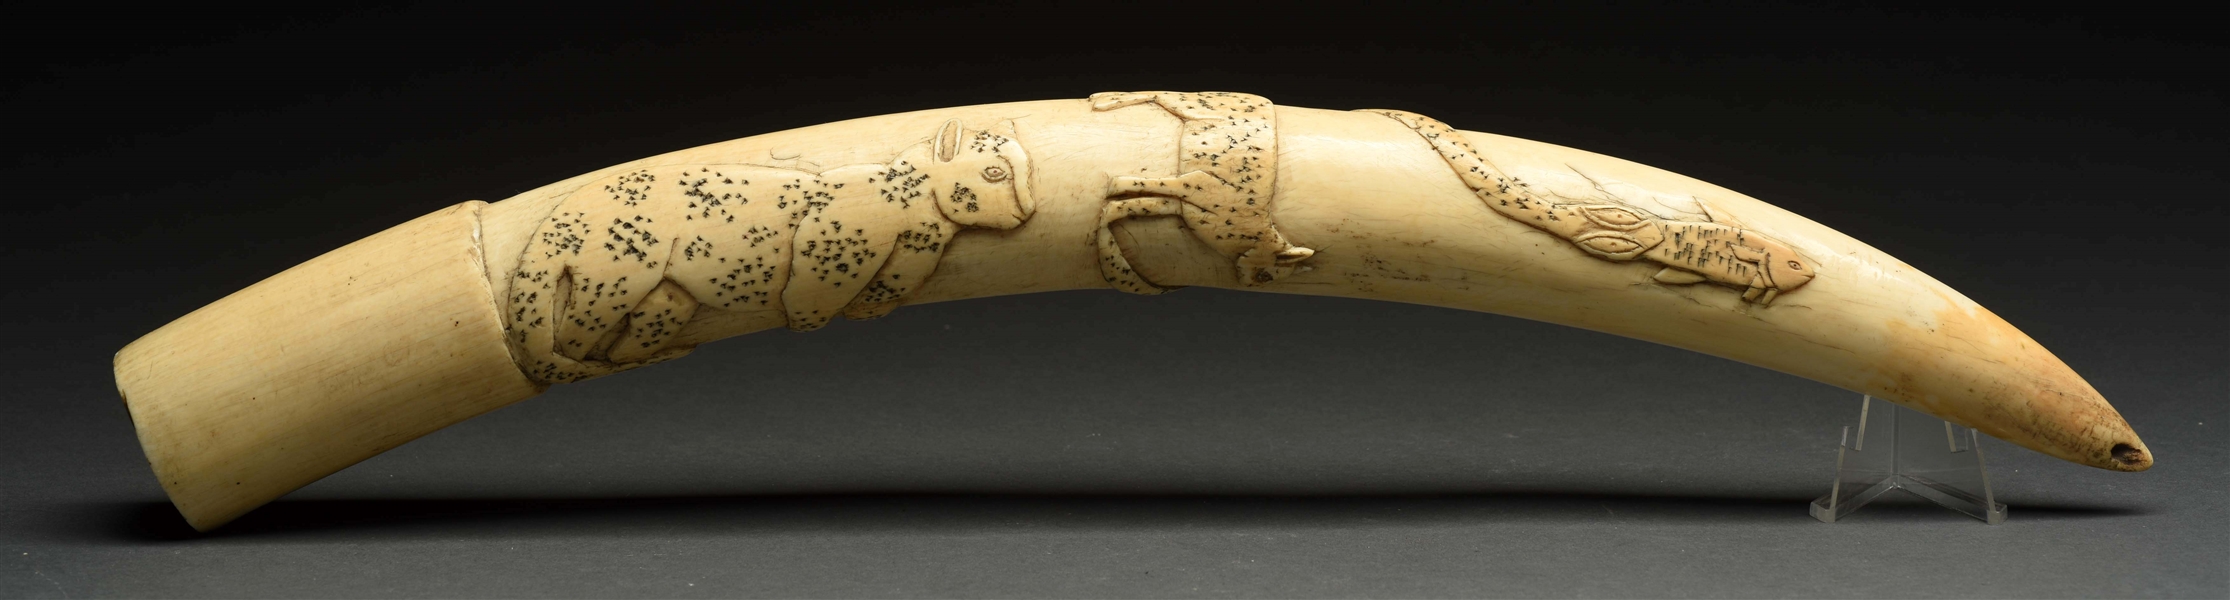 IVORY TUSK WITH CARVED CHEETAH, SNAKE AND FISH.